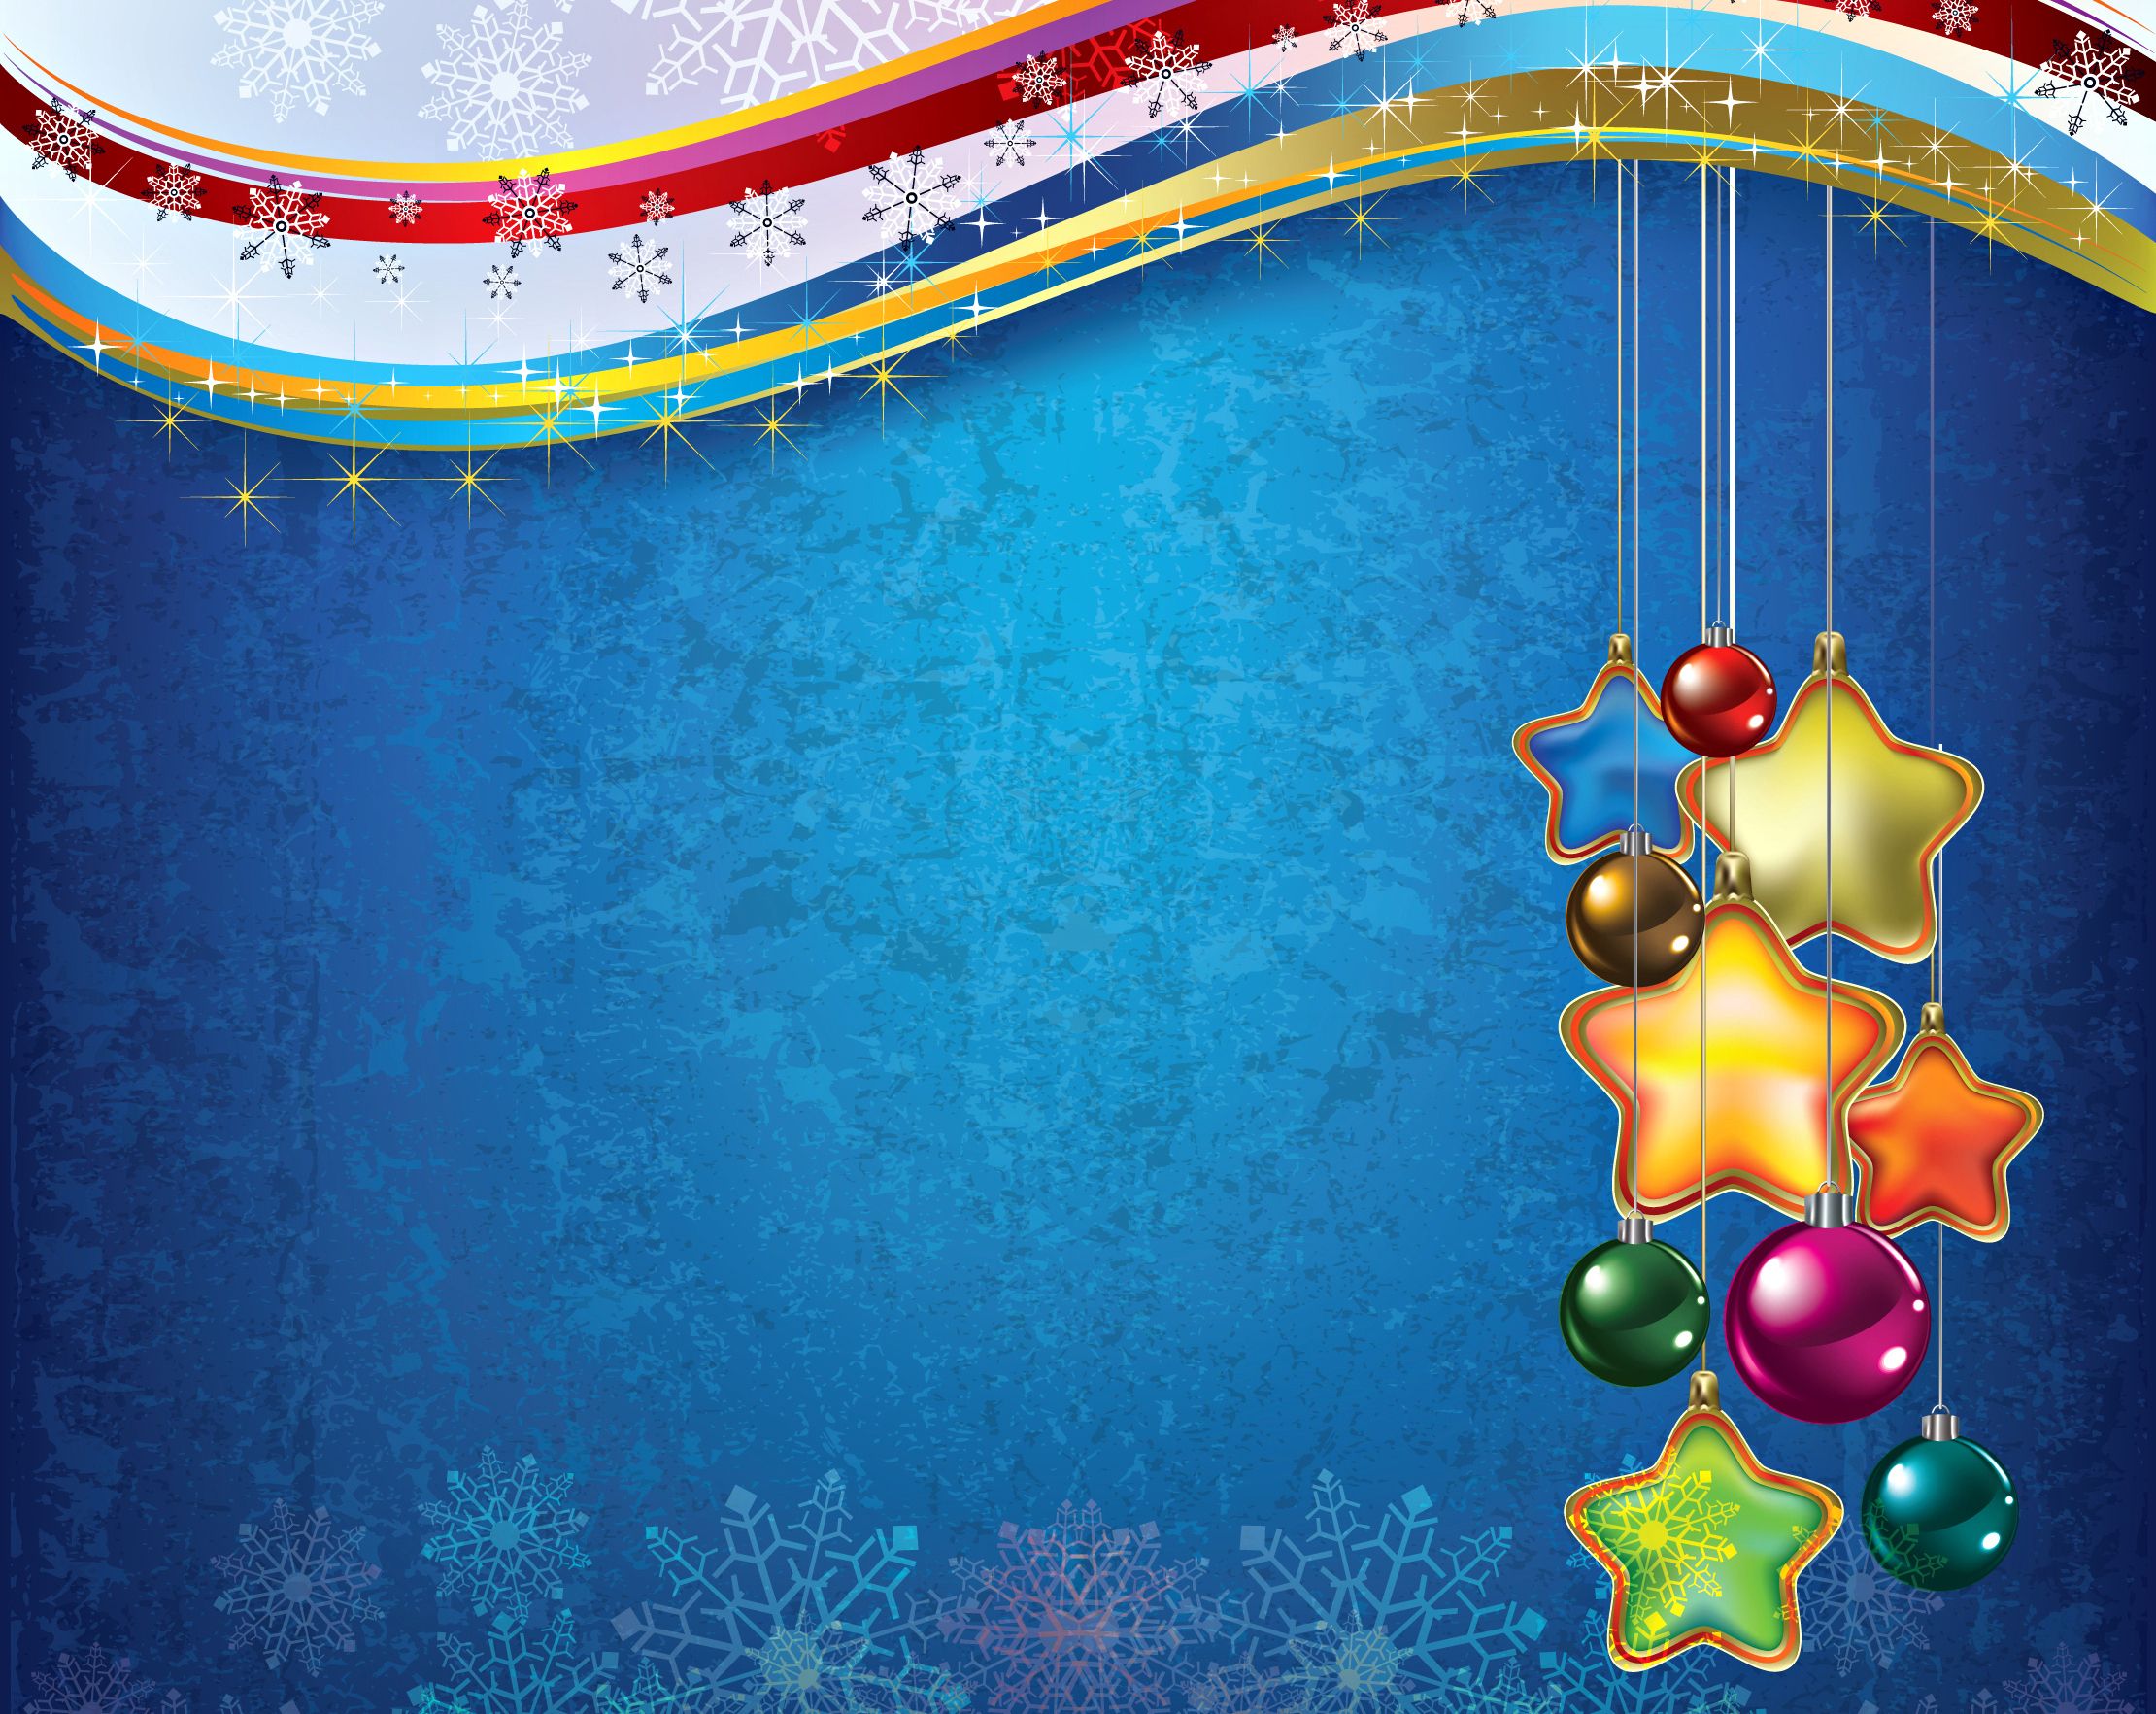 Christmas background wallpapers and images - wallpapers, pictures